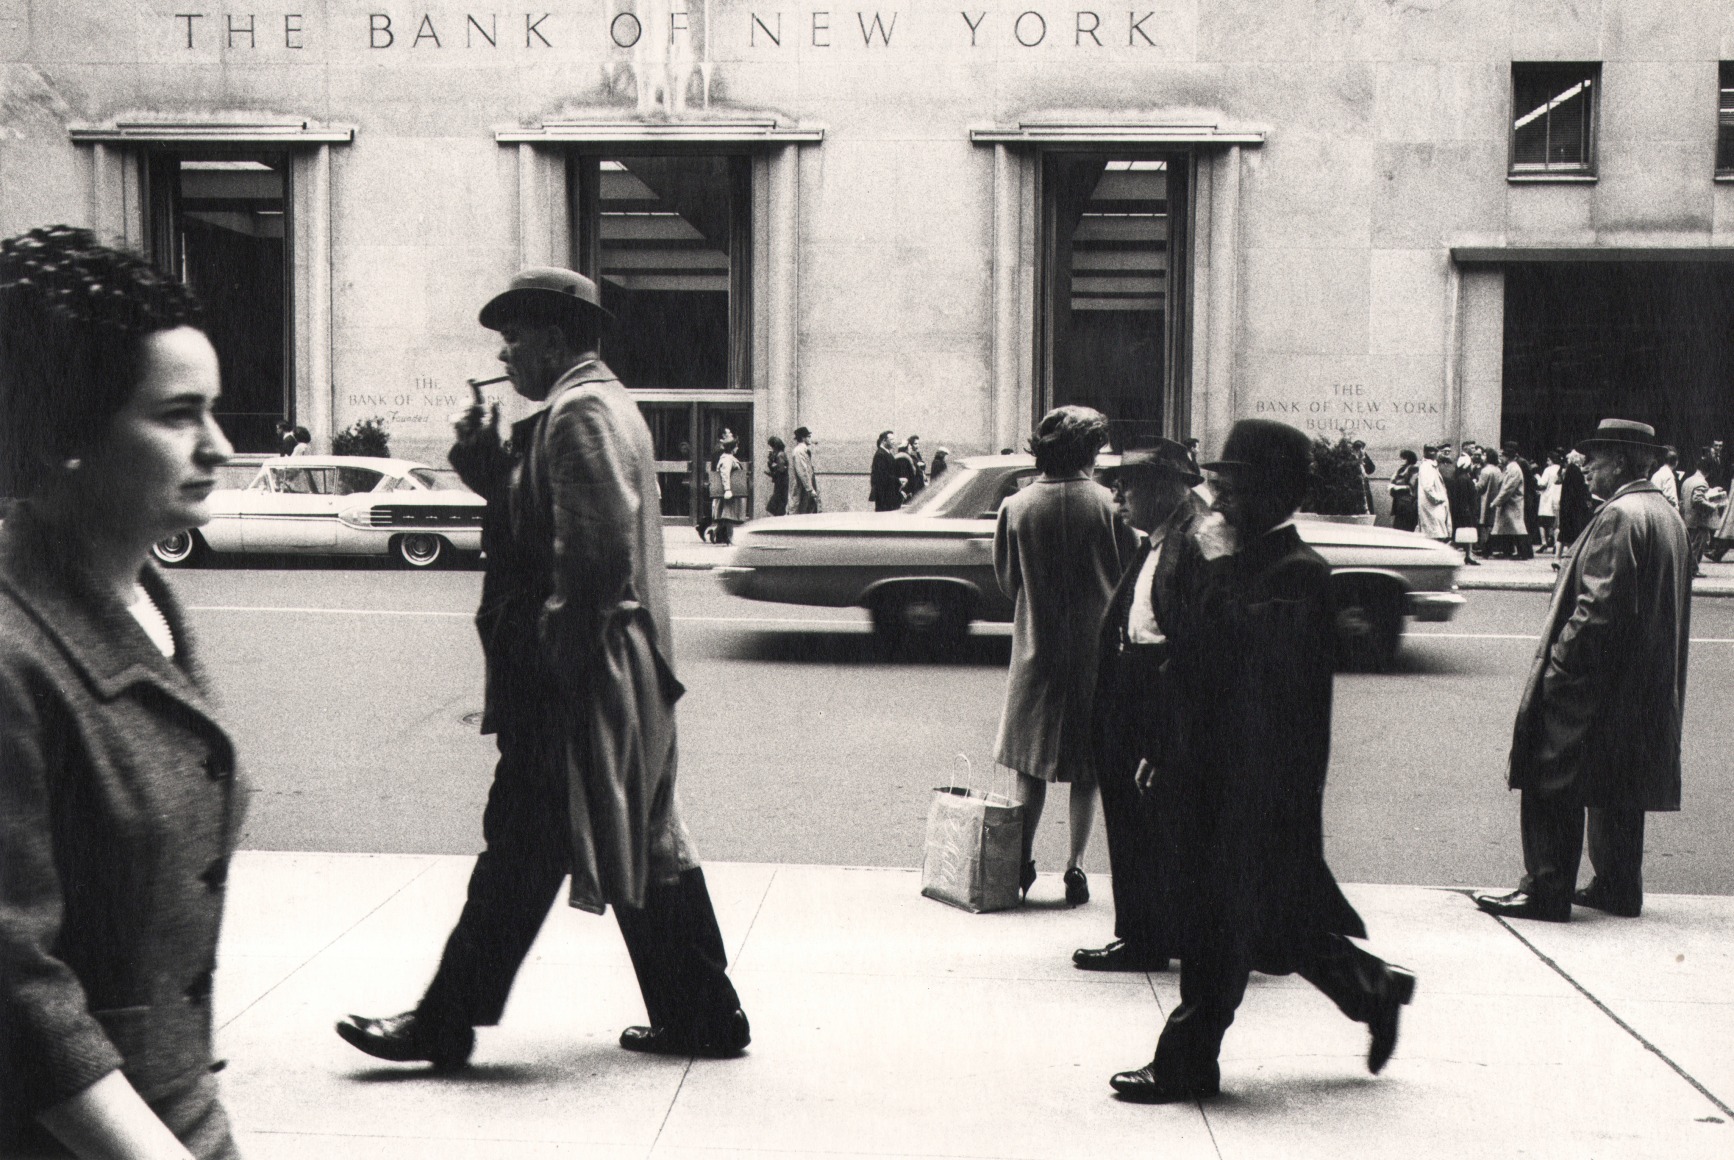 05. Simpson Kalisher, Untitled, ​c. 1959. Pedestrians walk horizontally across the frame on a sidewalk across the street from the Bank of New York, seen in the background.